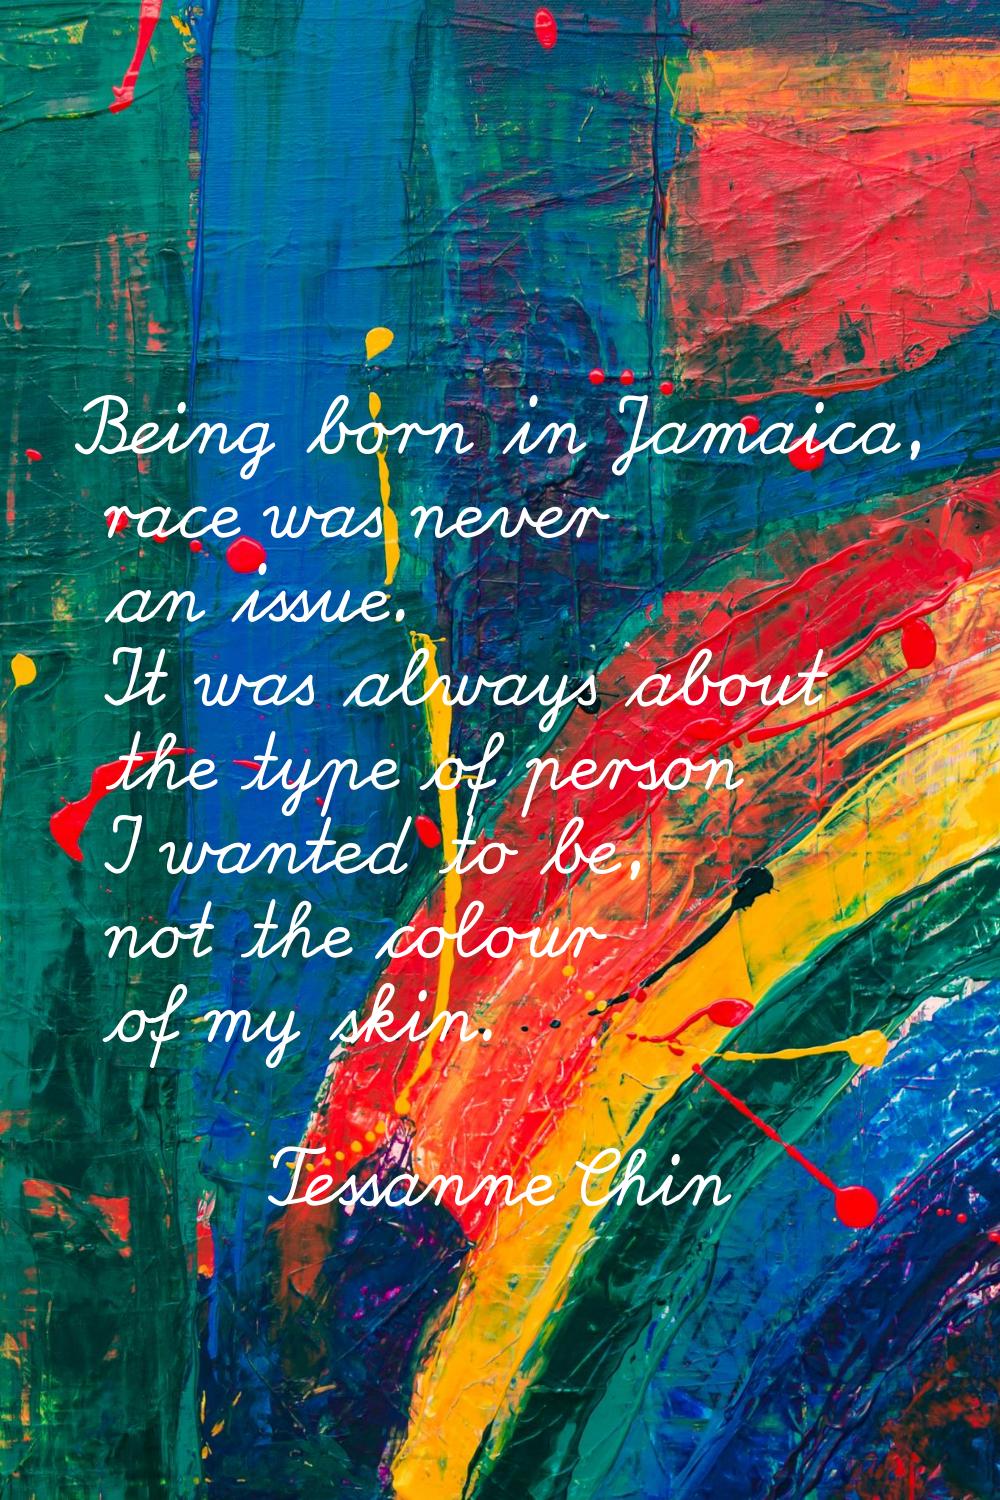 Being born in Jamaica, race was never an issue. It was always about the type of person I wanted to 